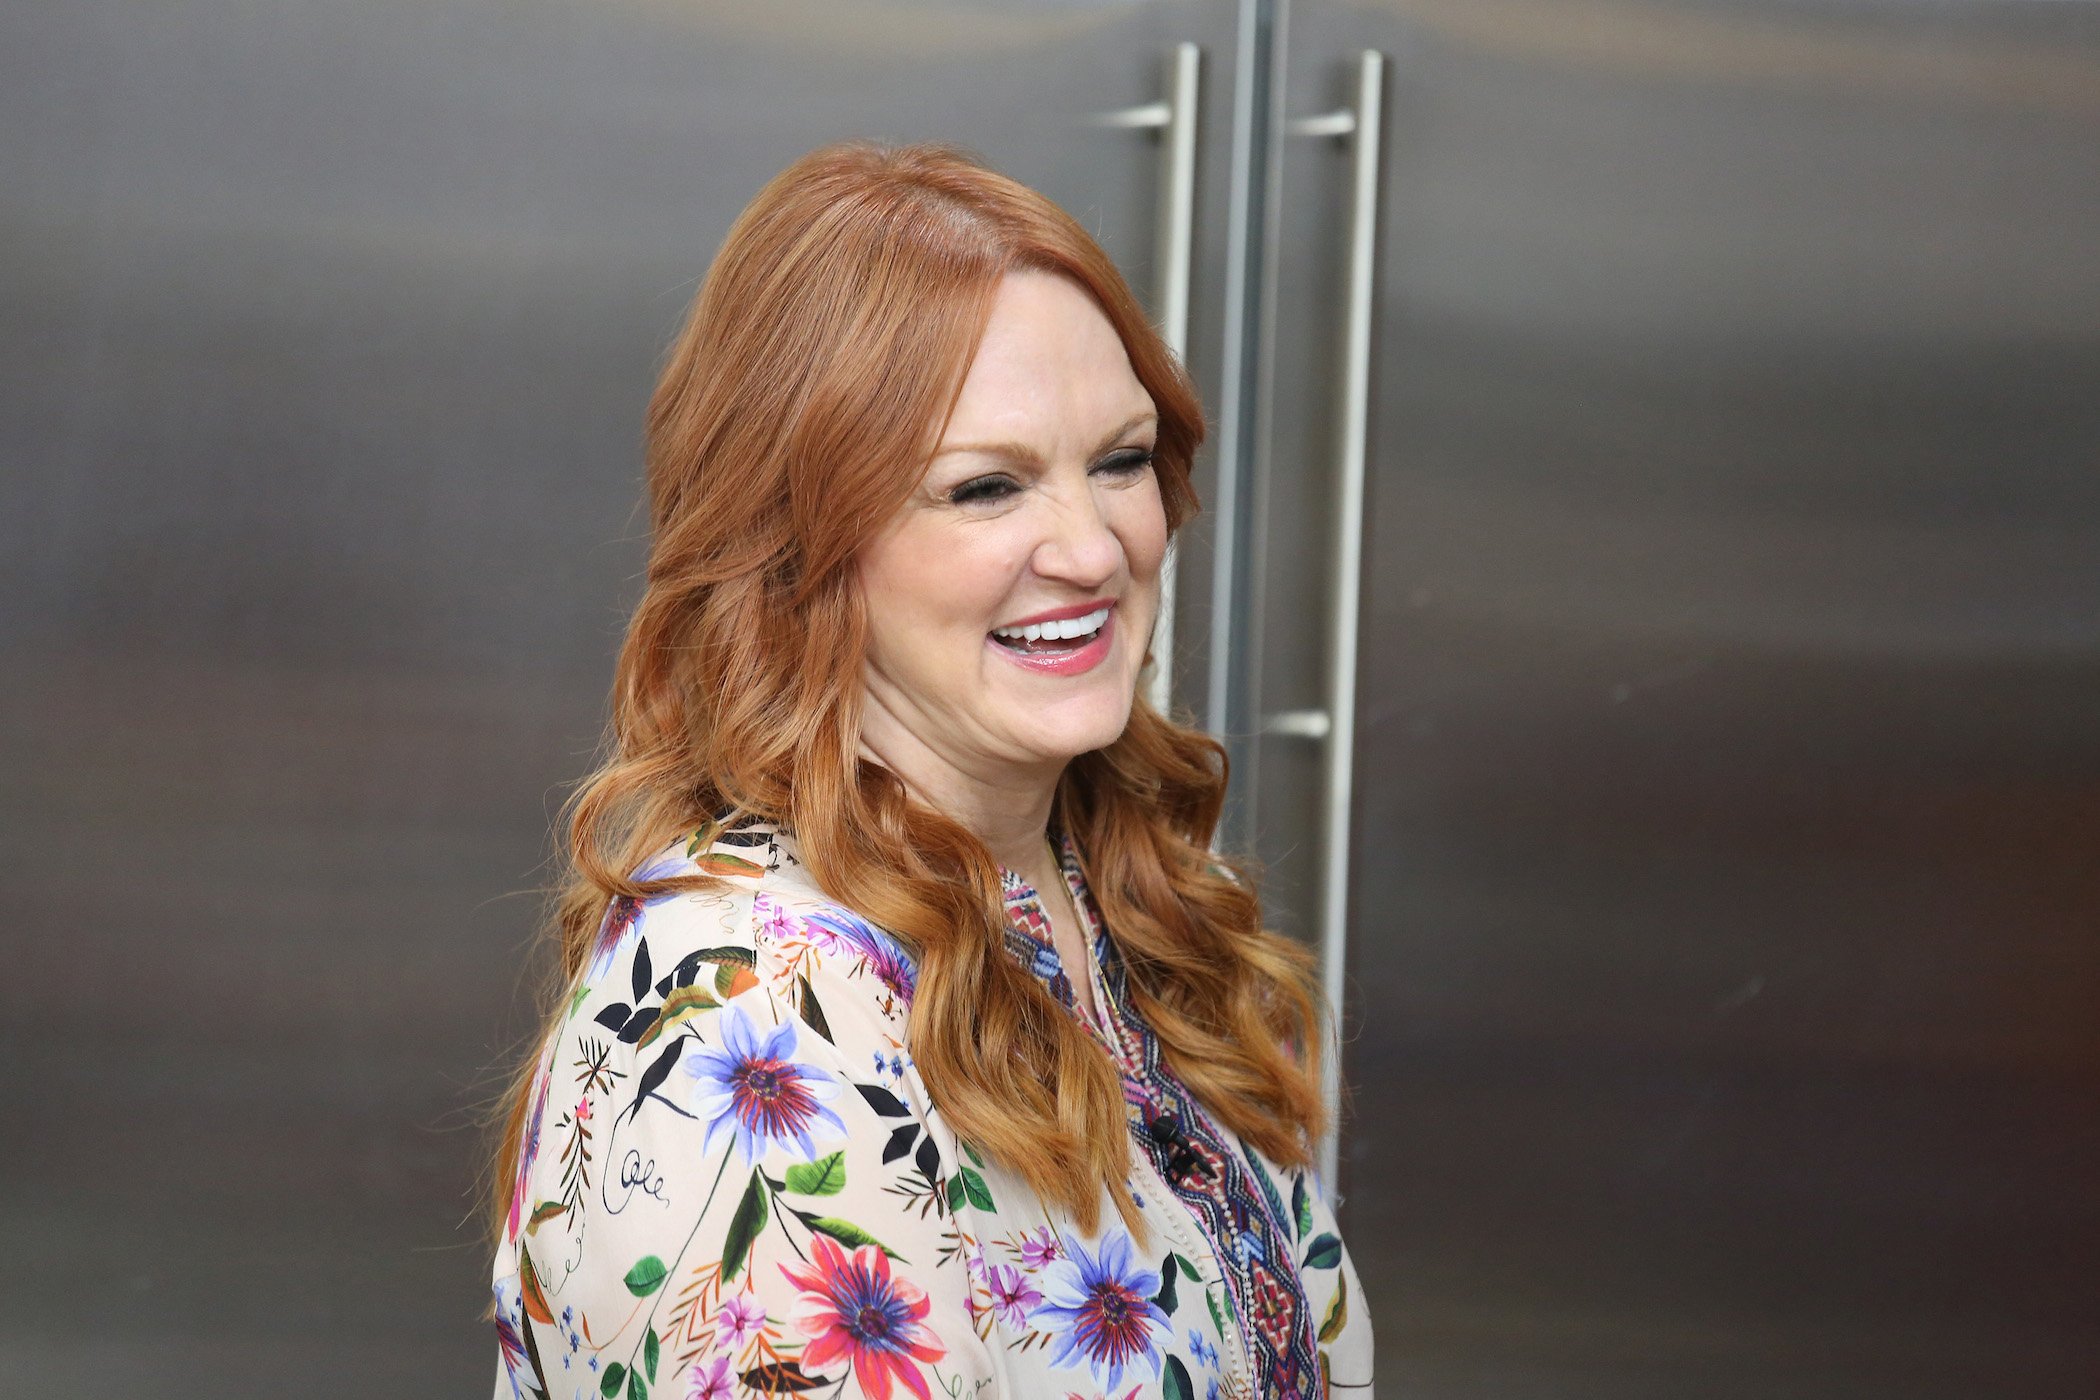 'Pioneer Woman' Ree Drummond smiling at the camera